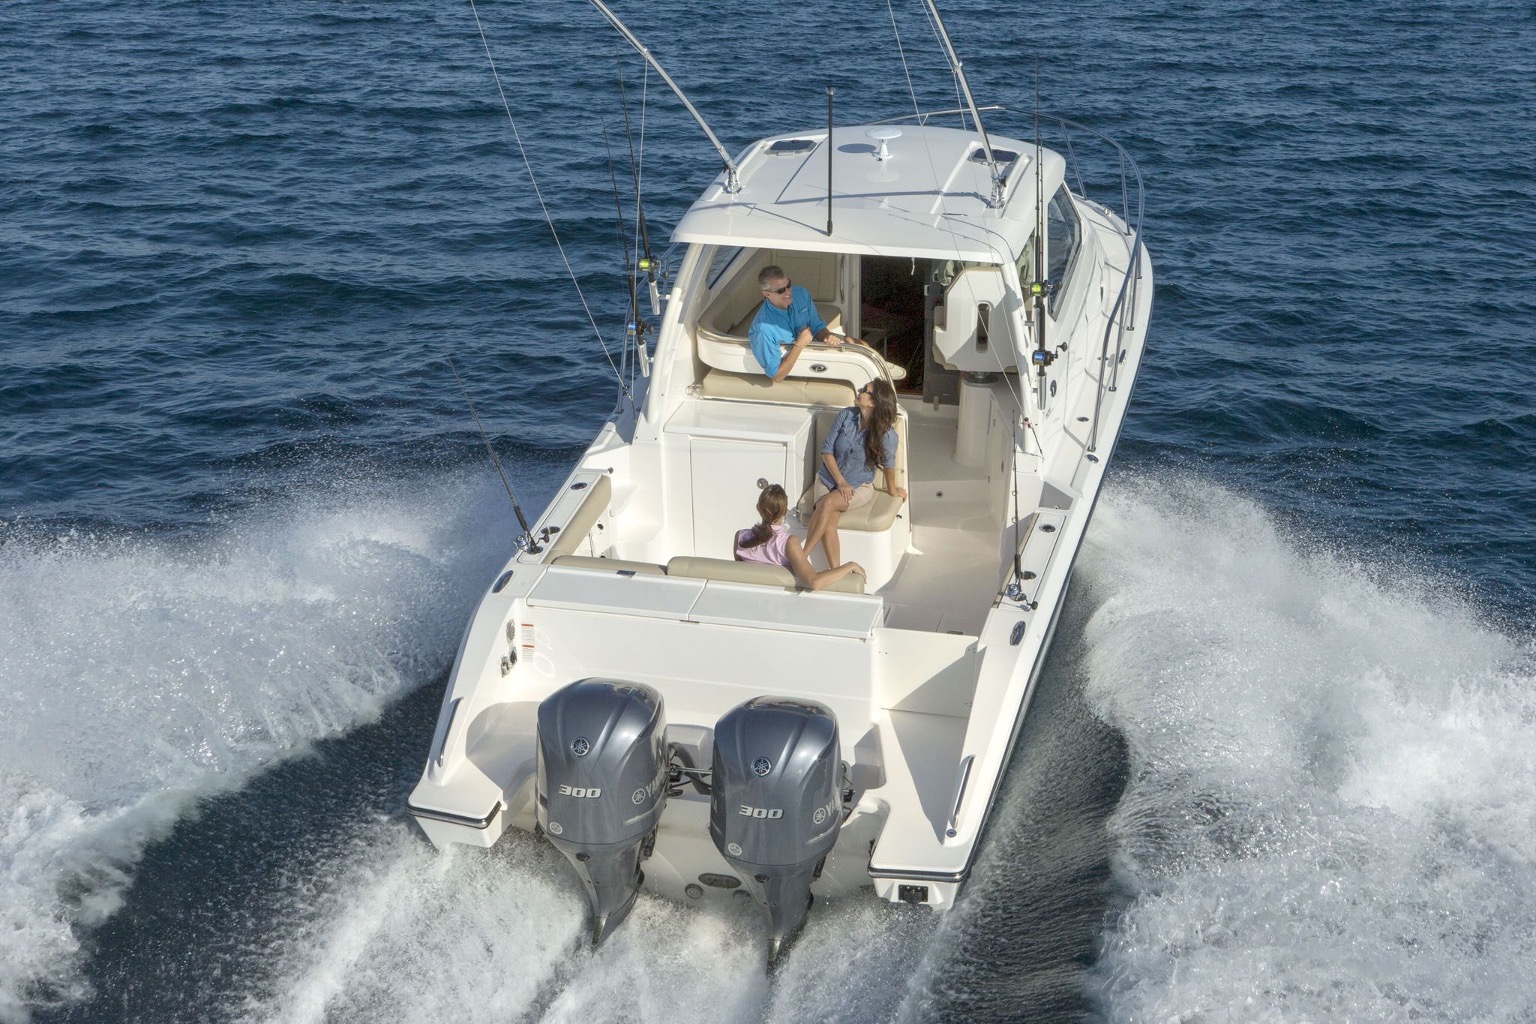 Unlike some other offshore fishing boats, Pursuit offers various warranties on its hulls.